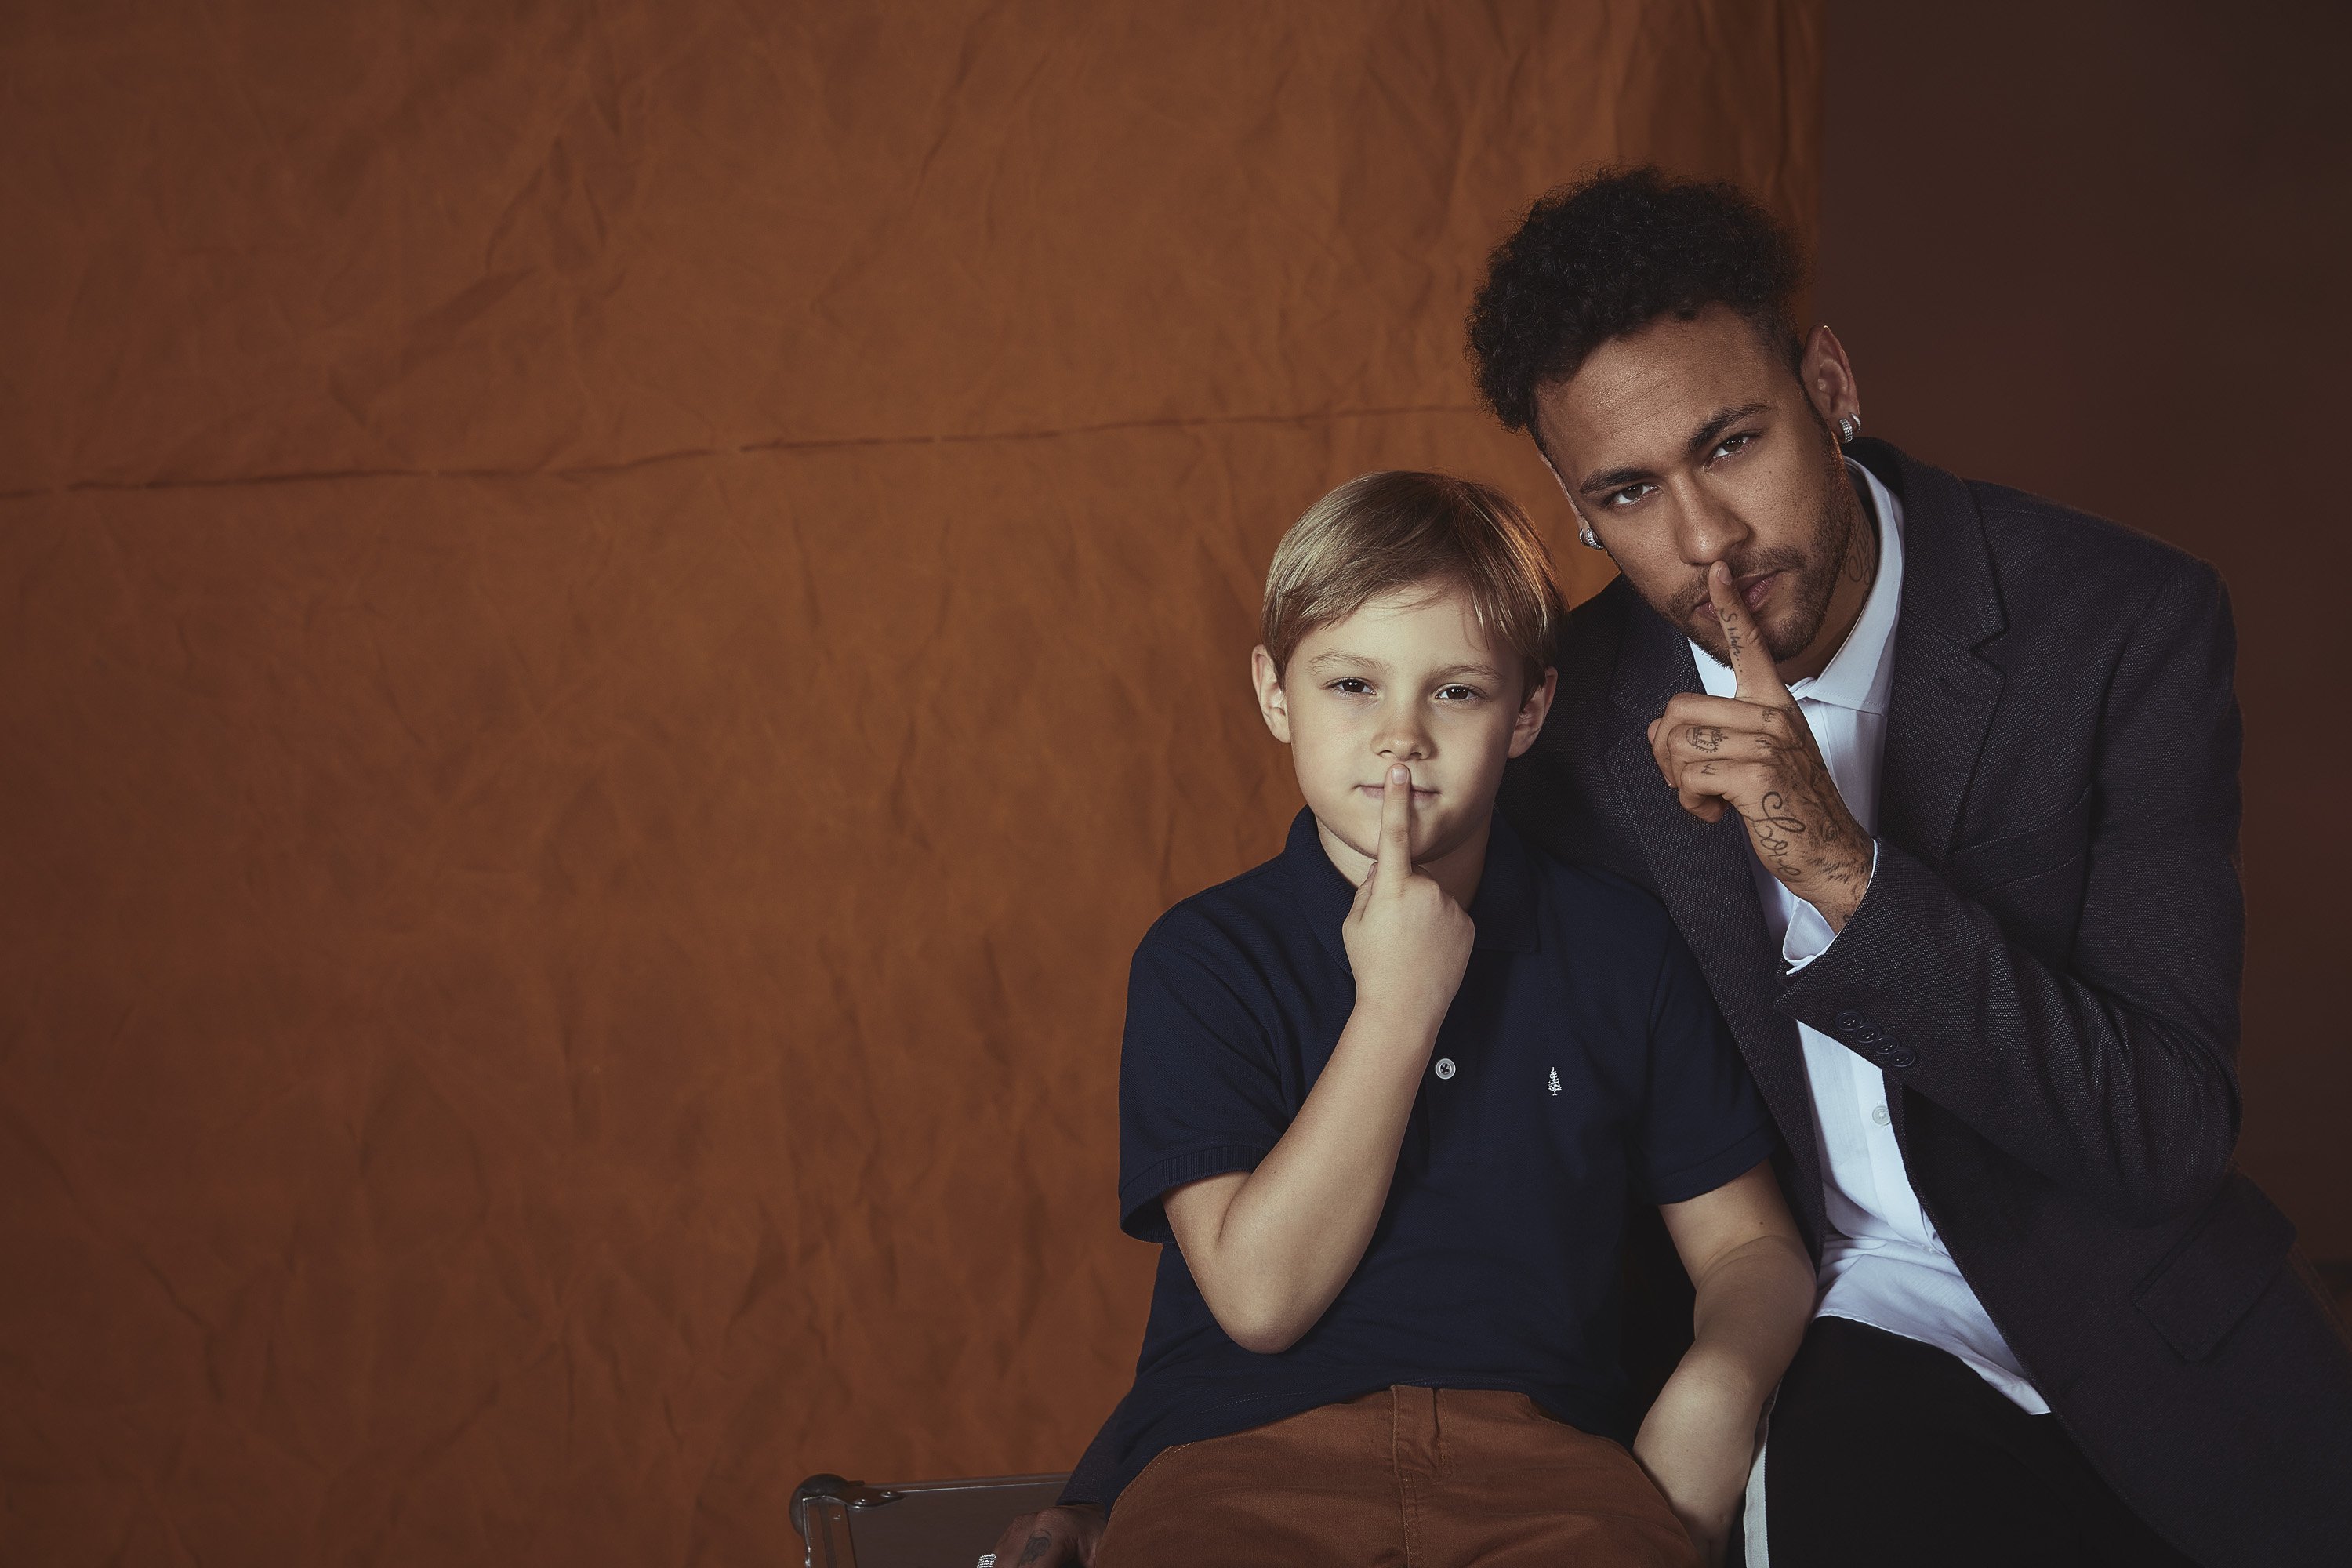 Neymar With His Son, HD Sports, 4k Wallpapers, Images, Backgrounds